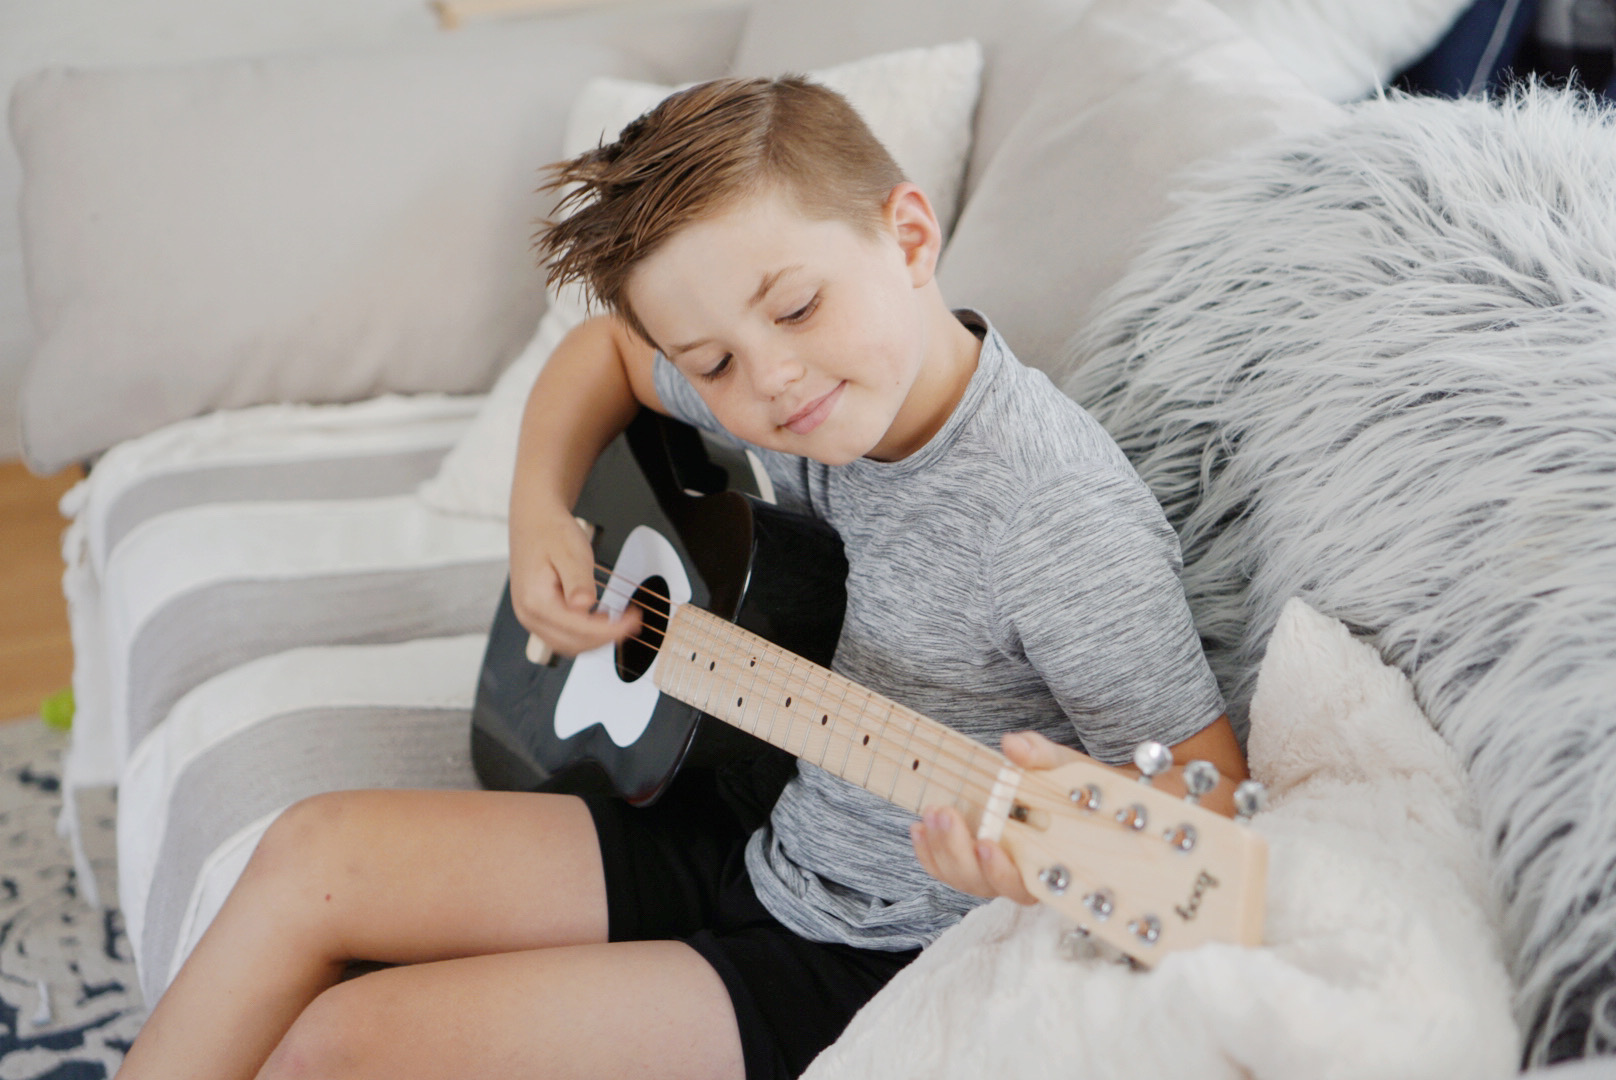 Loog Guitar Review - Best guitar for kids and Guitar Lessons app with video learning plus songbook